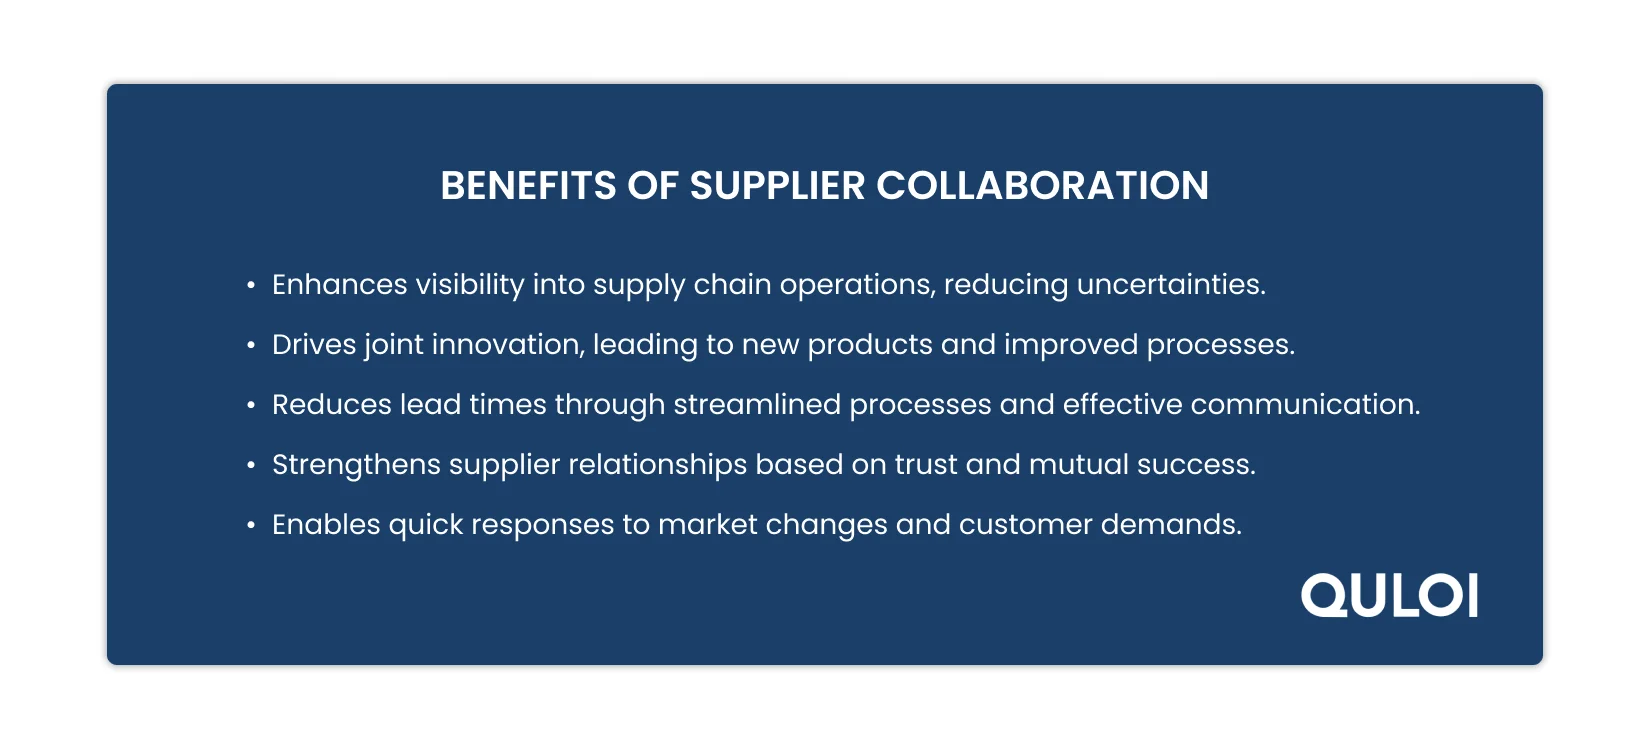 Benefits of Supplier Collaboration